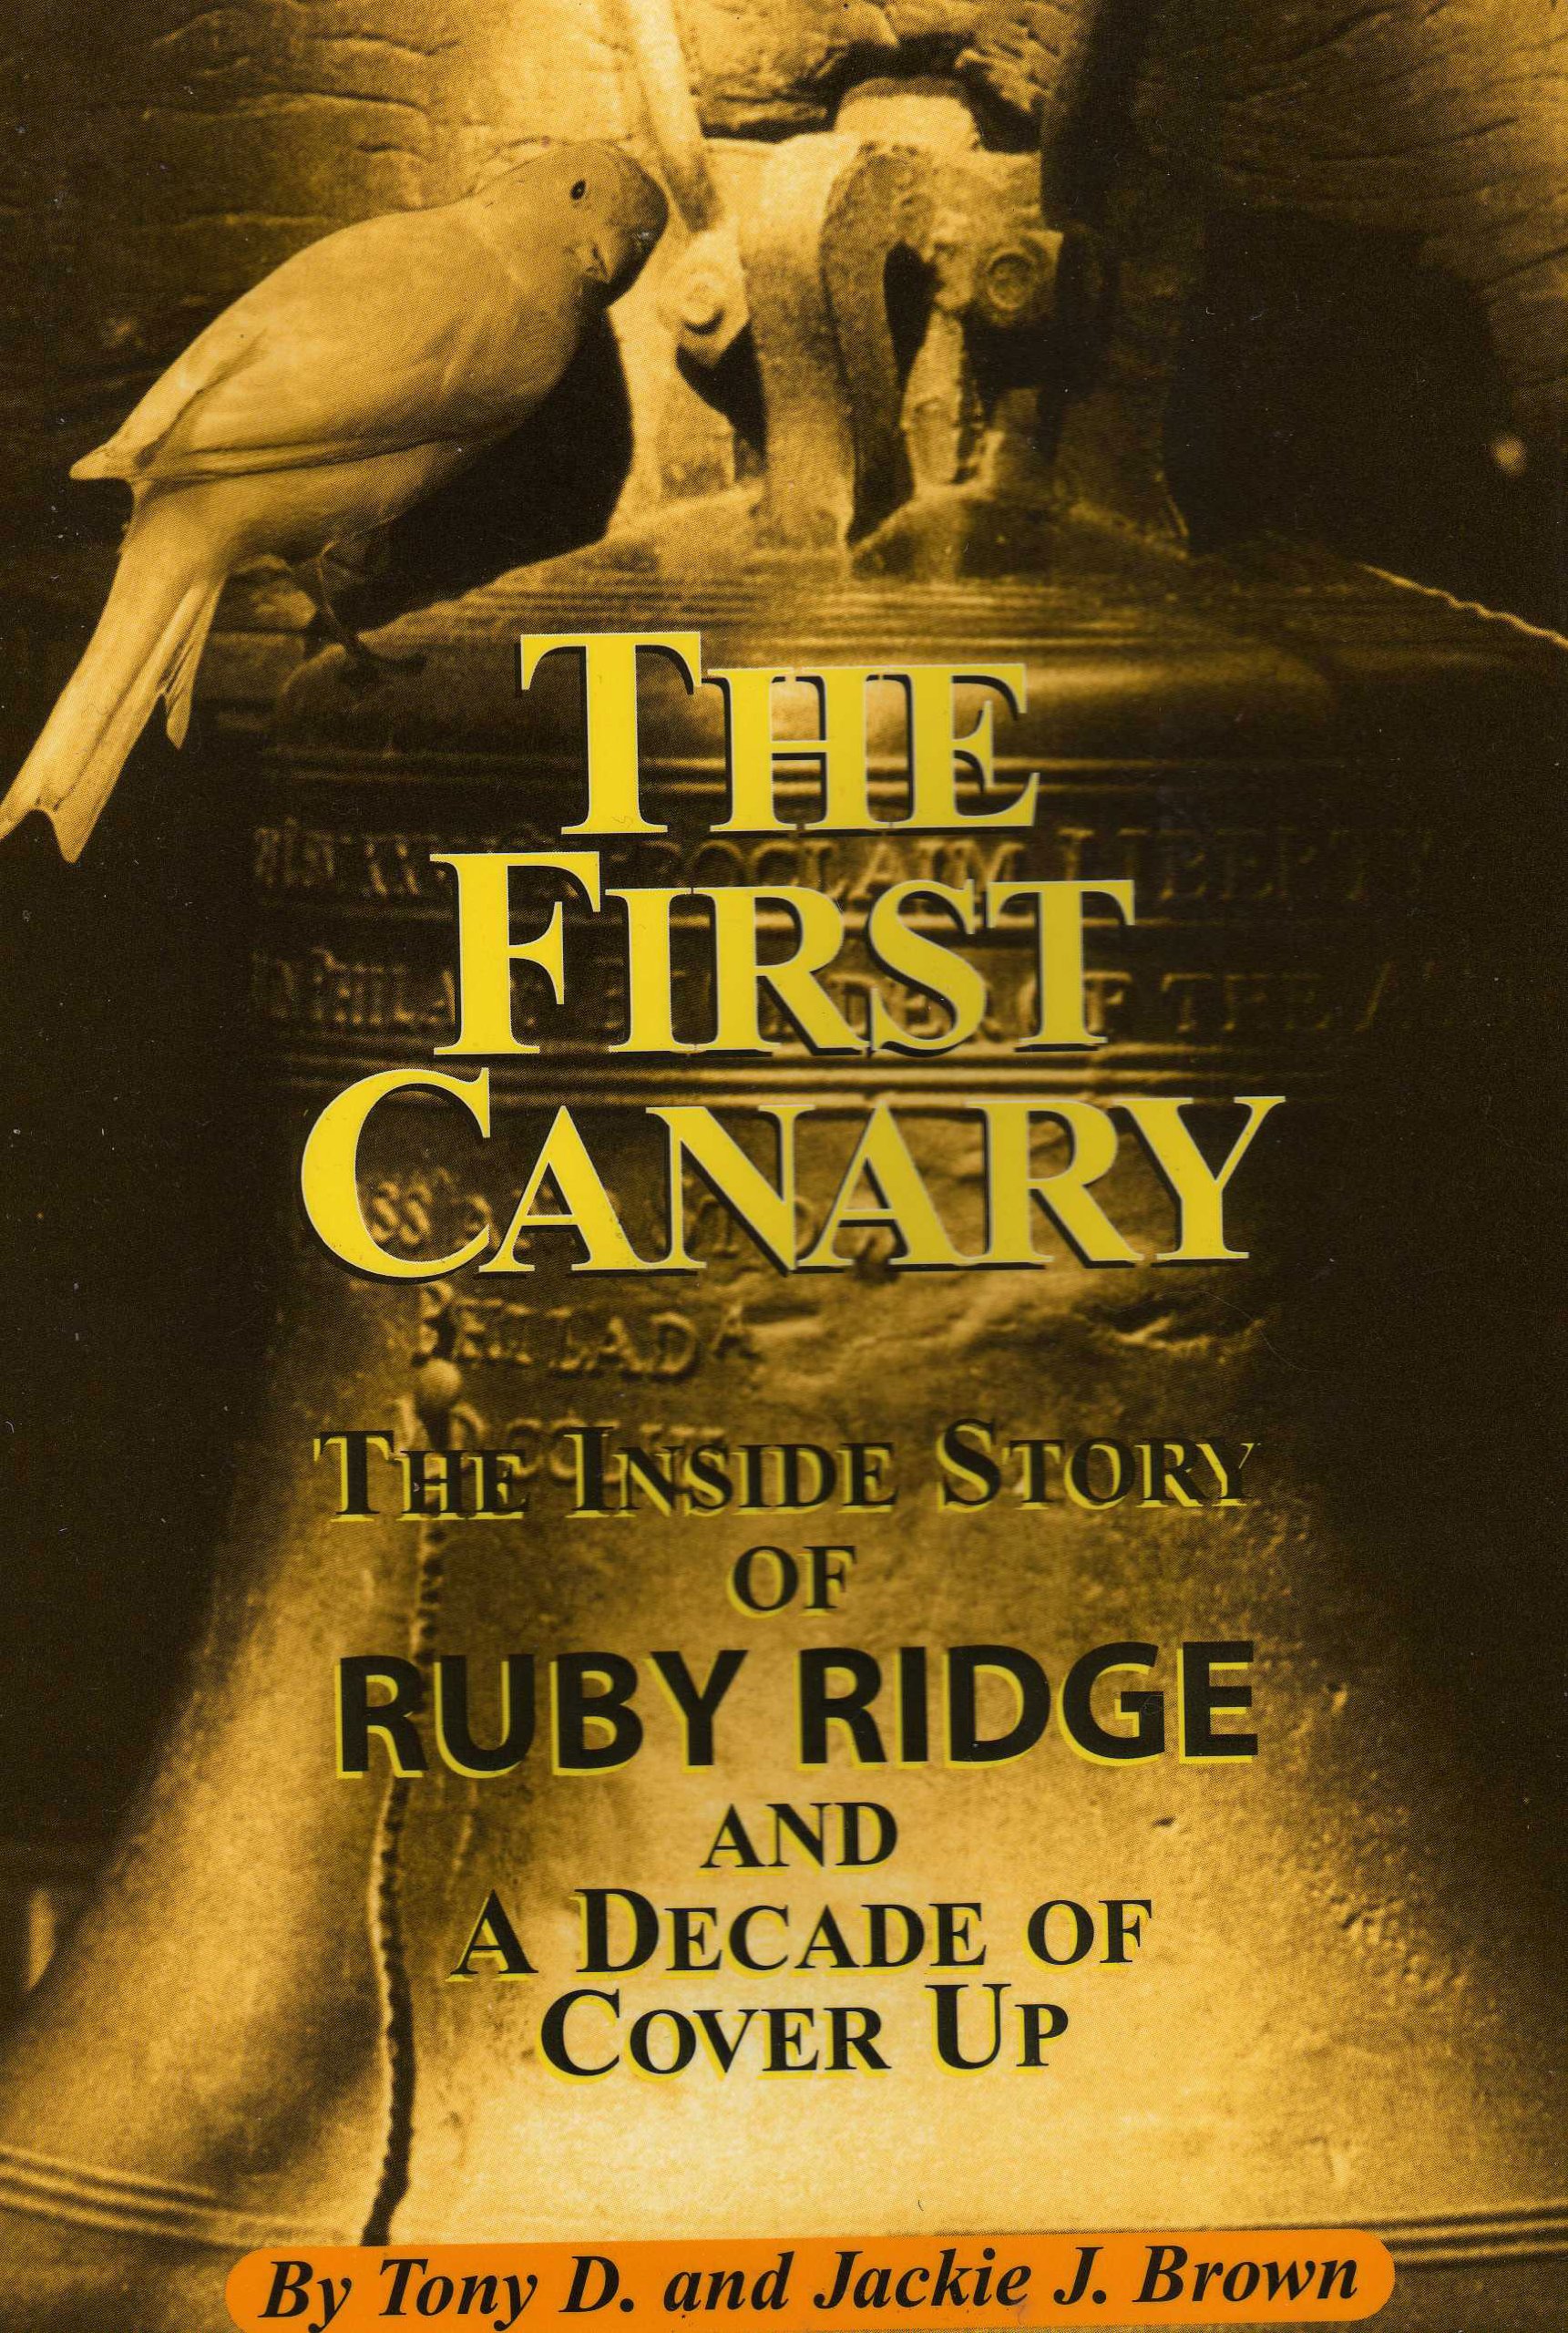 The first canary: The inside story of Ruby Ridge and a decade of cover-up (book cover)